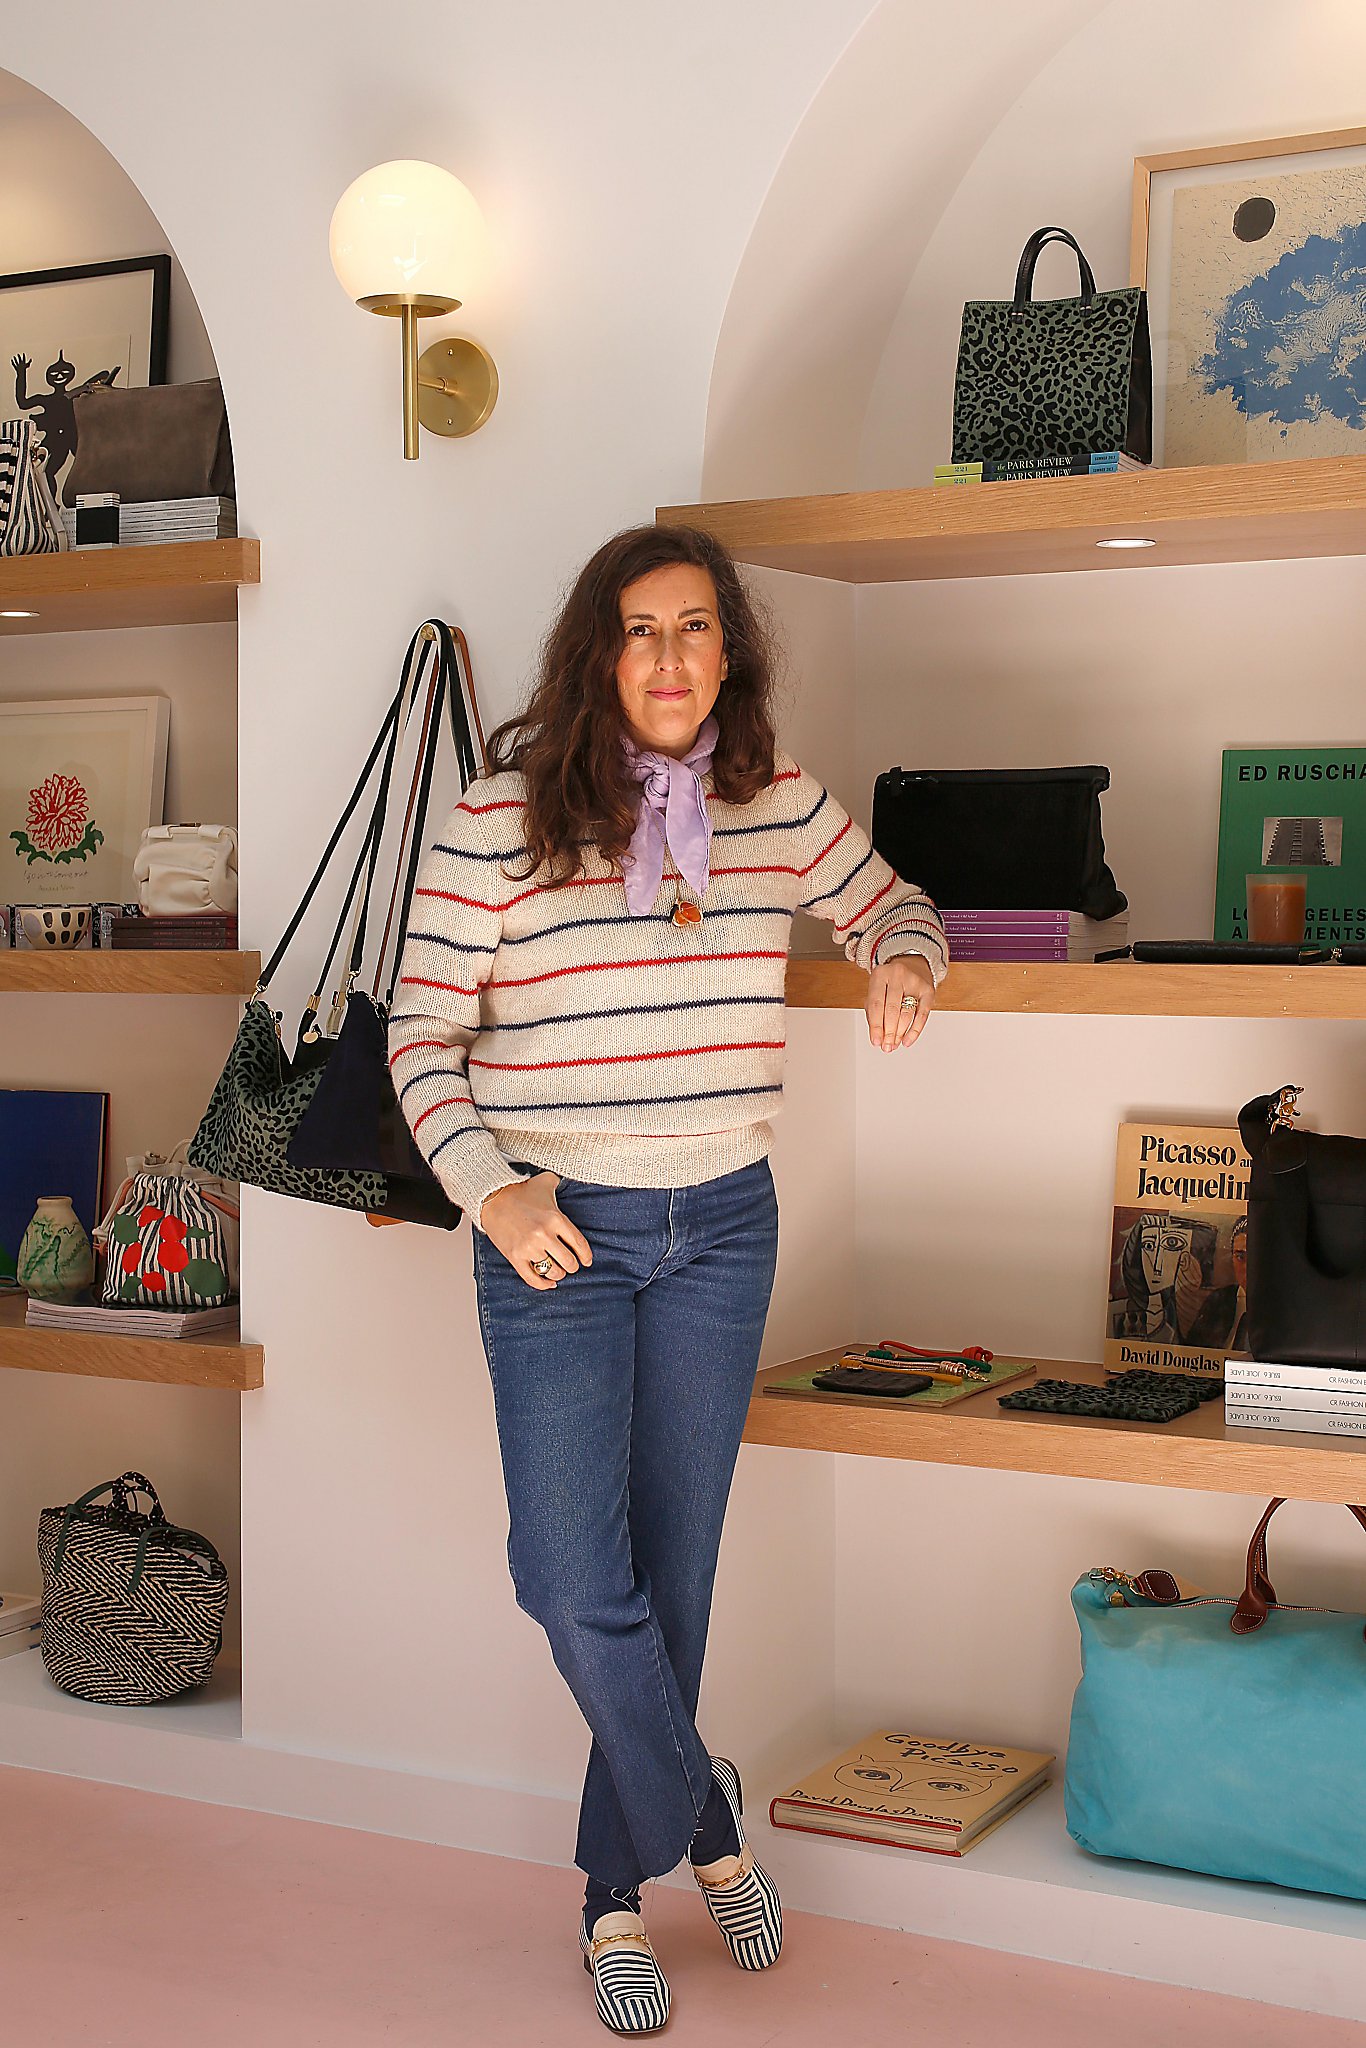 The Fashionable World of Clare Vivier